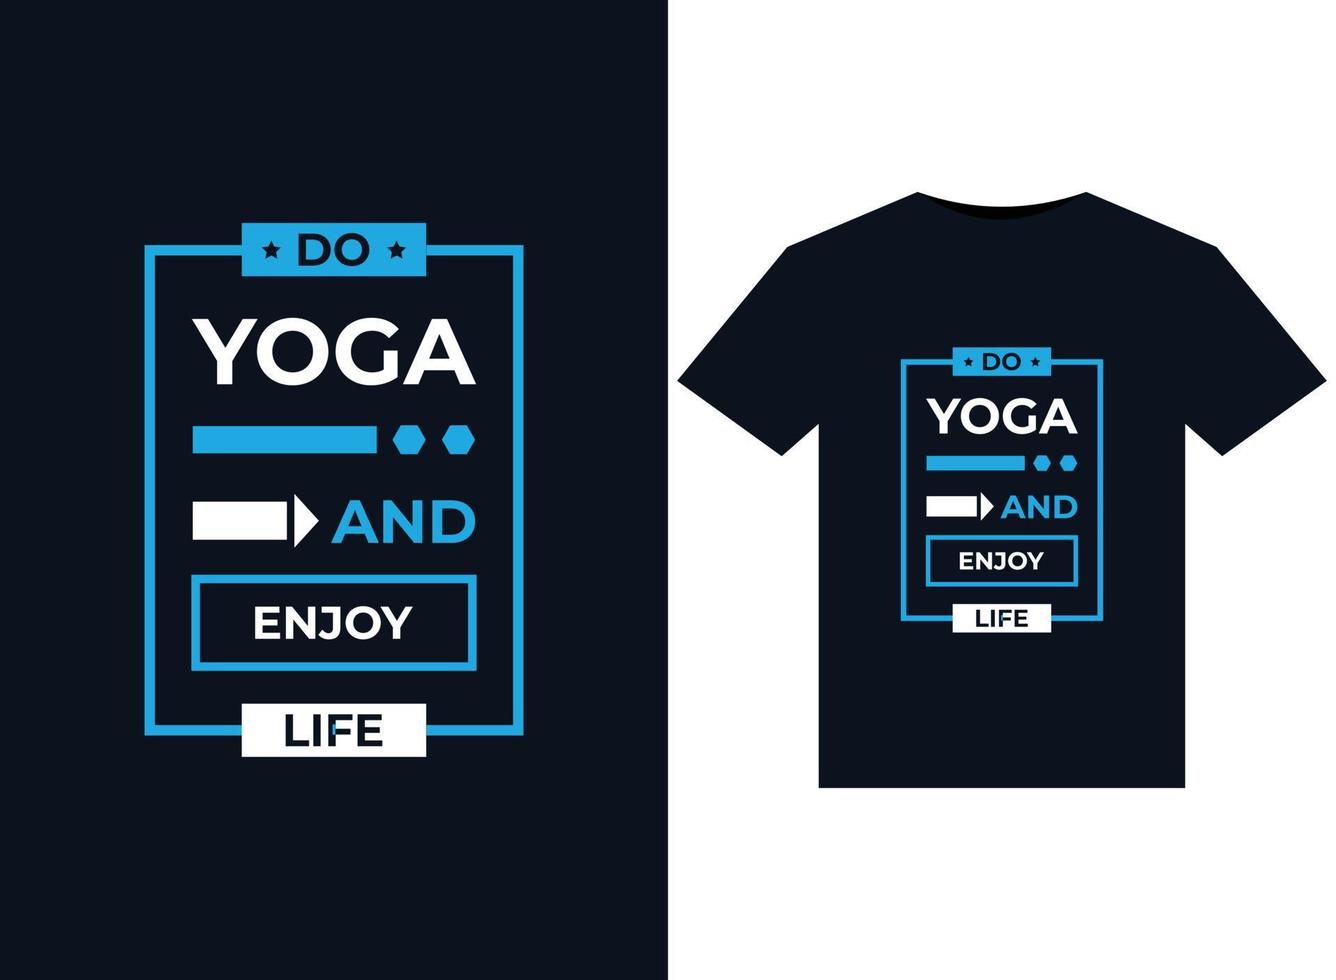 Do yoga and enjoy life illustrations for print-ready T-Shirts design vector